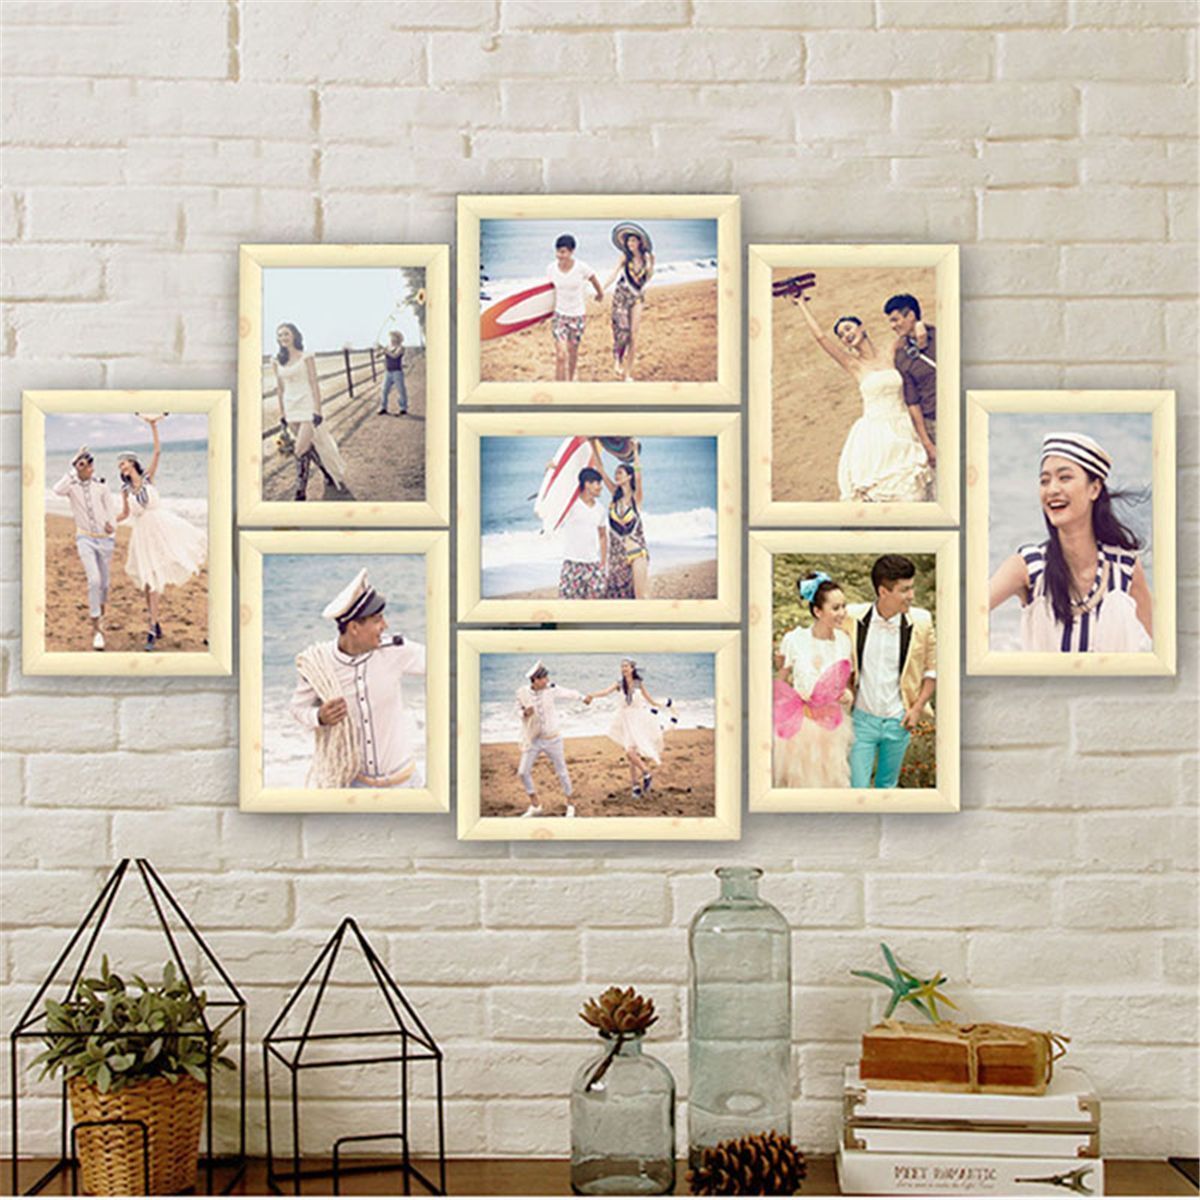 DIY-9PCS-Family-Collage-Wedding-Photo-Picture-Frame-Wall-Hanging-Display-Home-Decorations-1557878